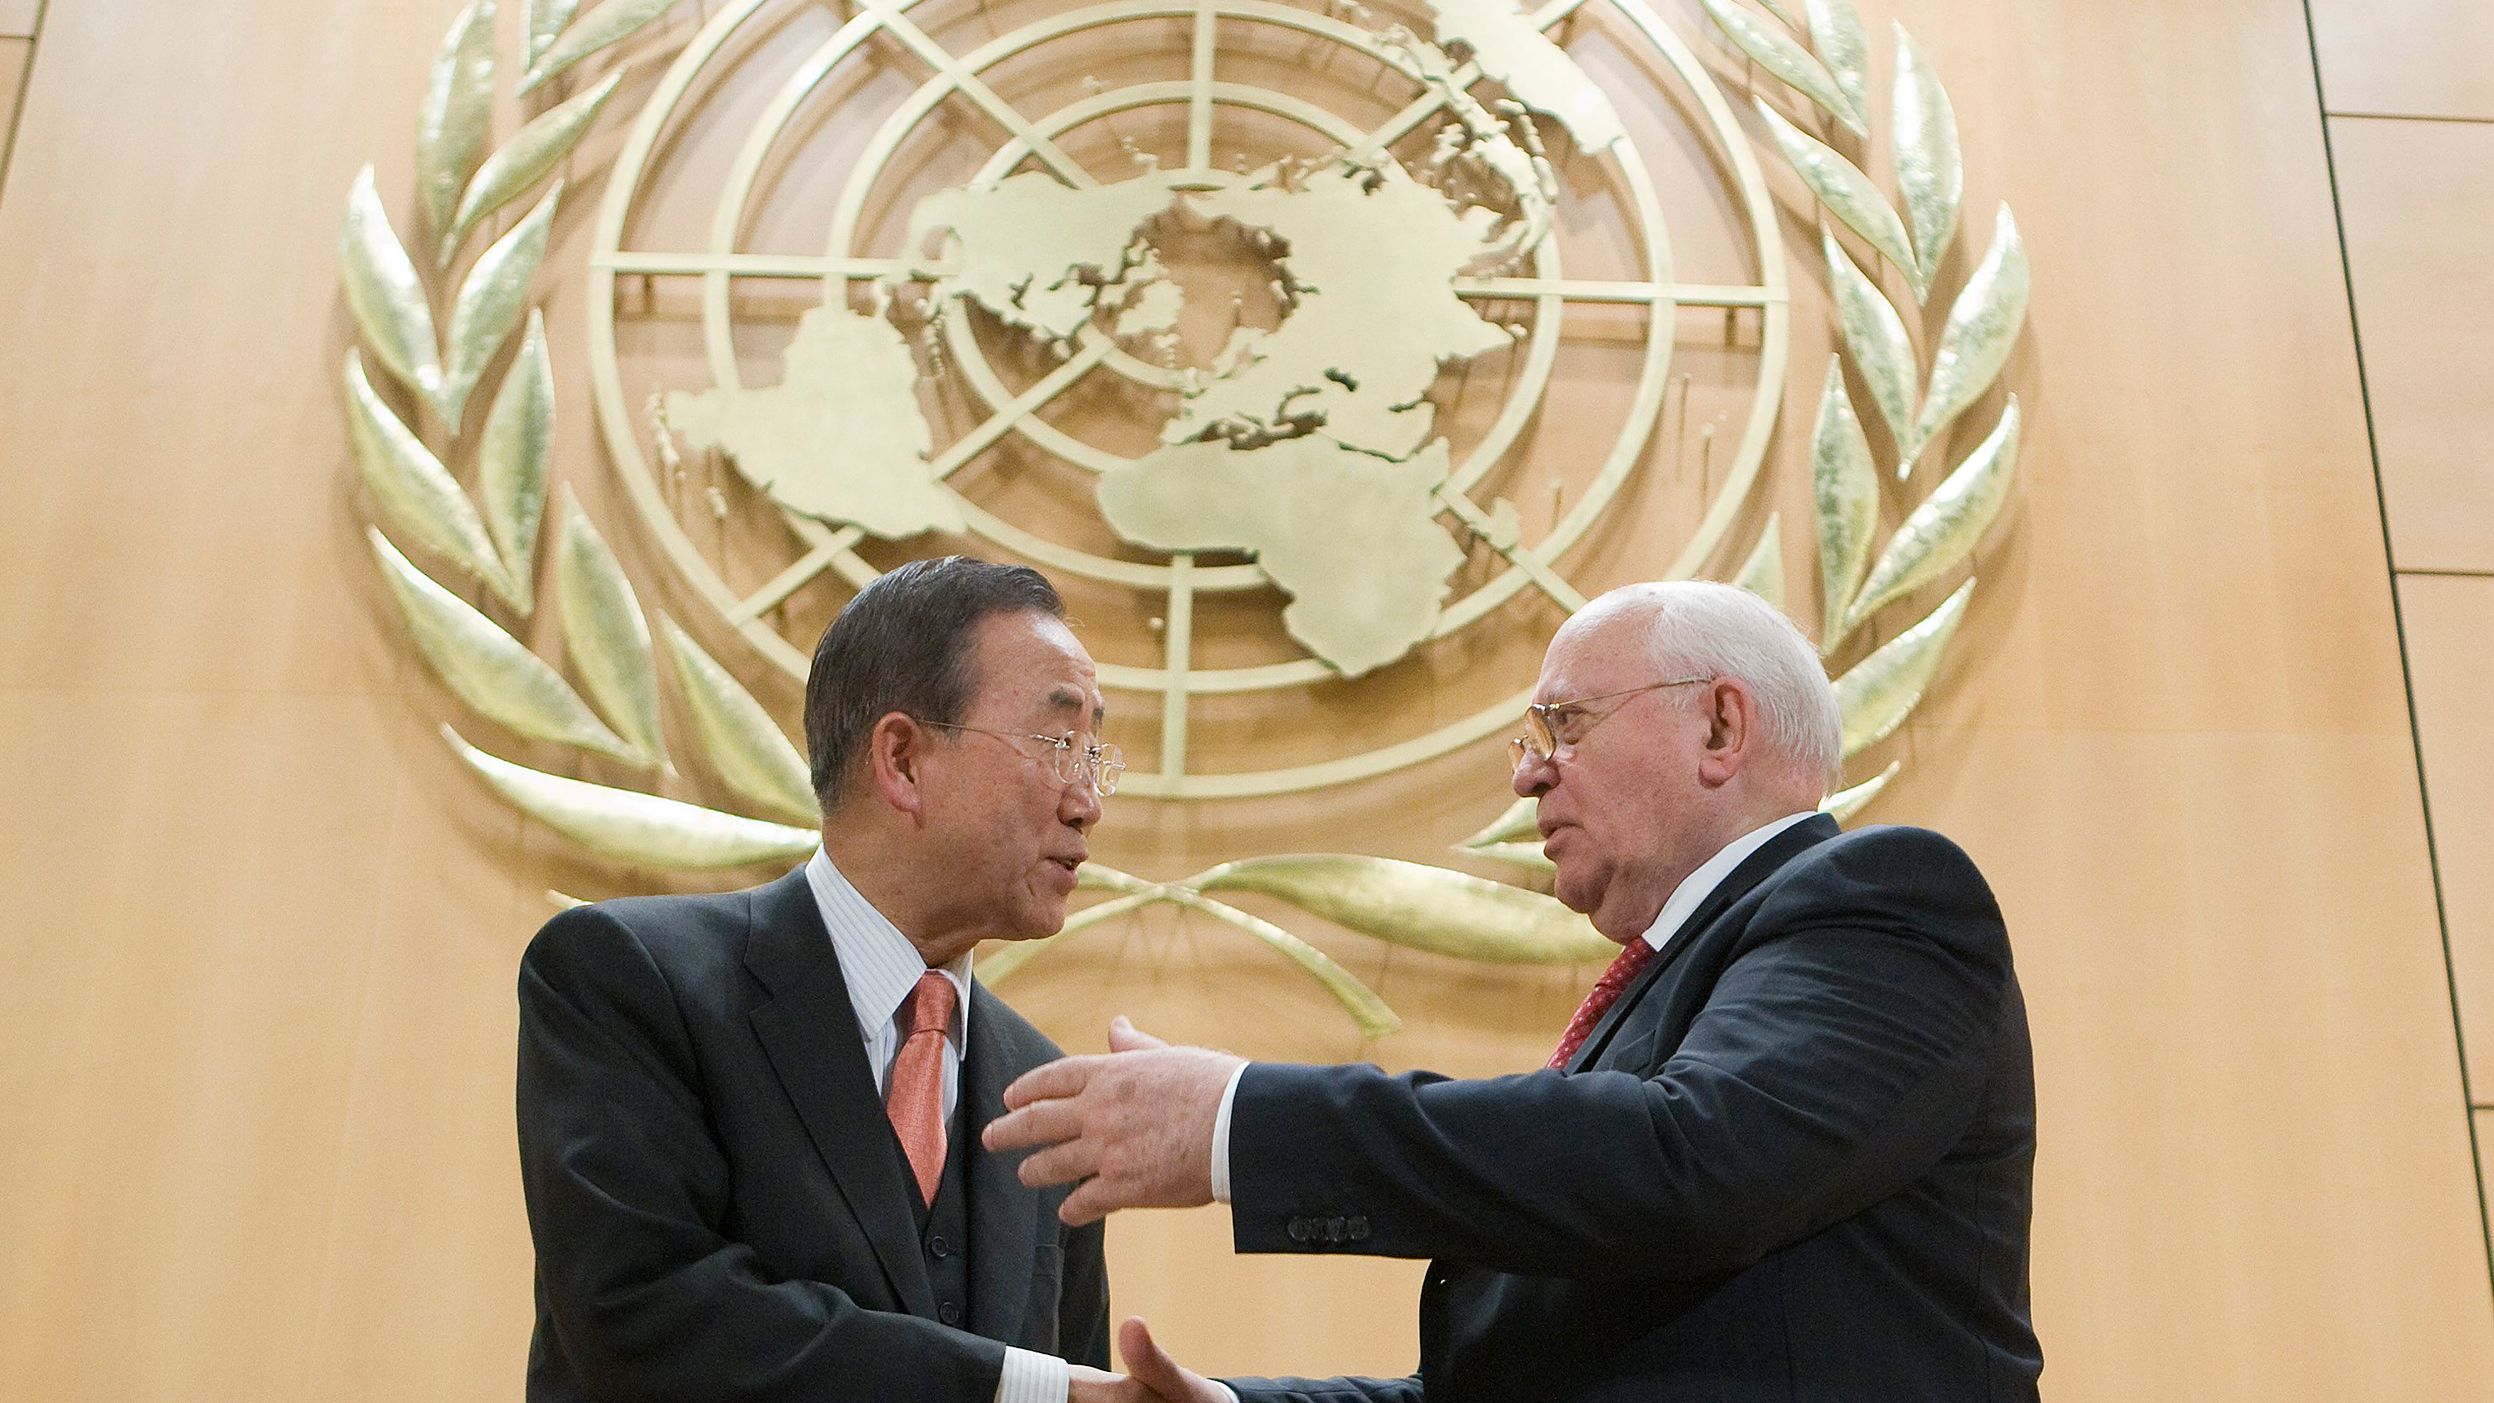 Gorbachev and United Nations Secretary-General Ban Ki-moon shake hands at the UN's European headquarters in 2009. The theme that day was "resetting the nuclear disarmament agenda."